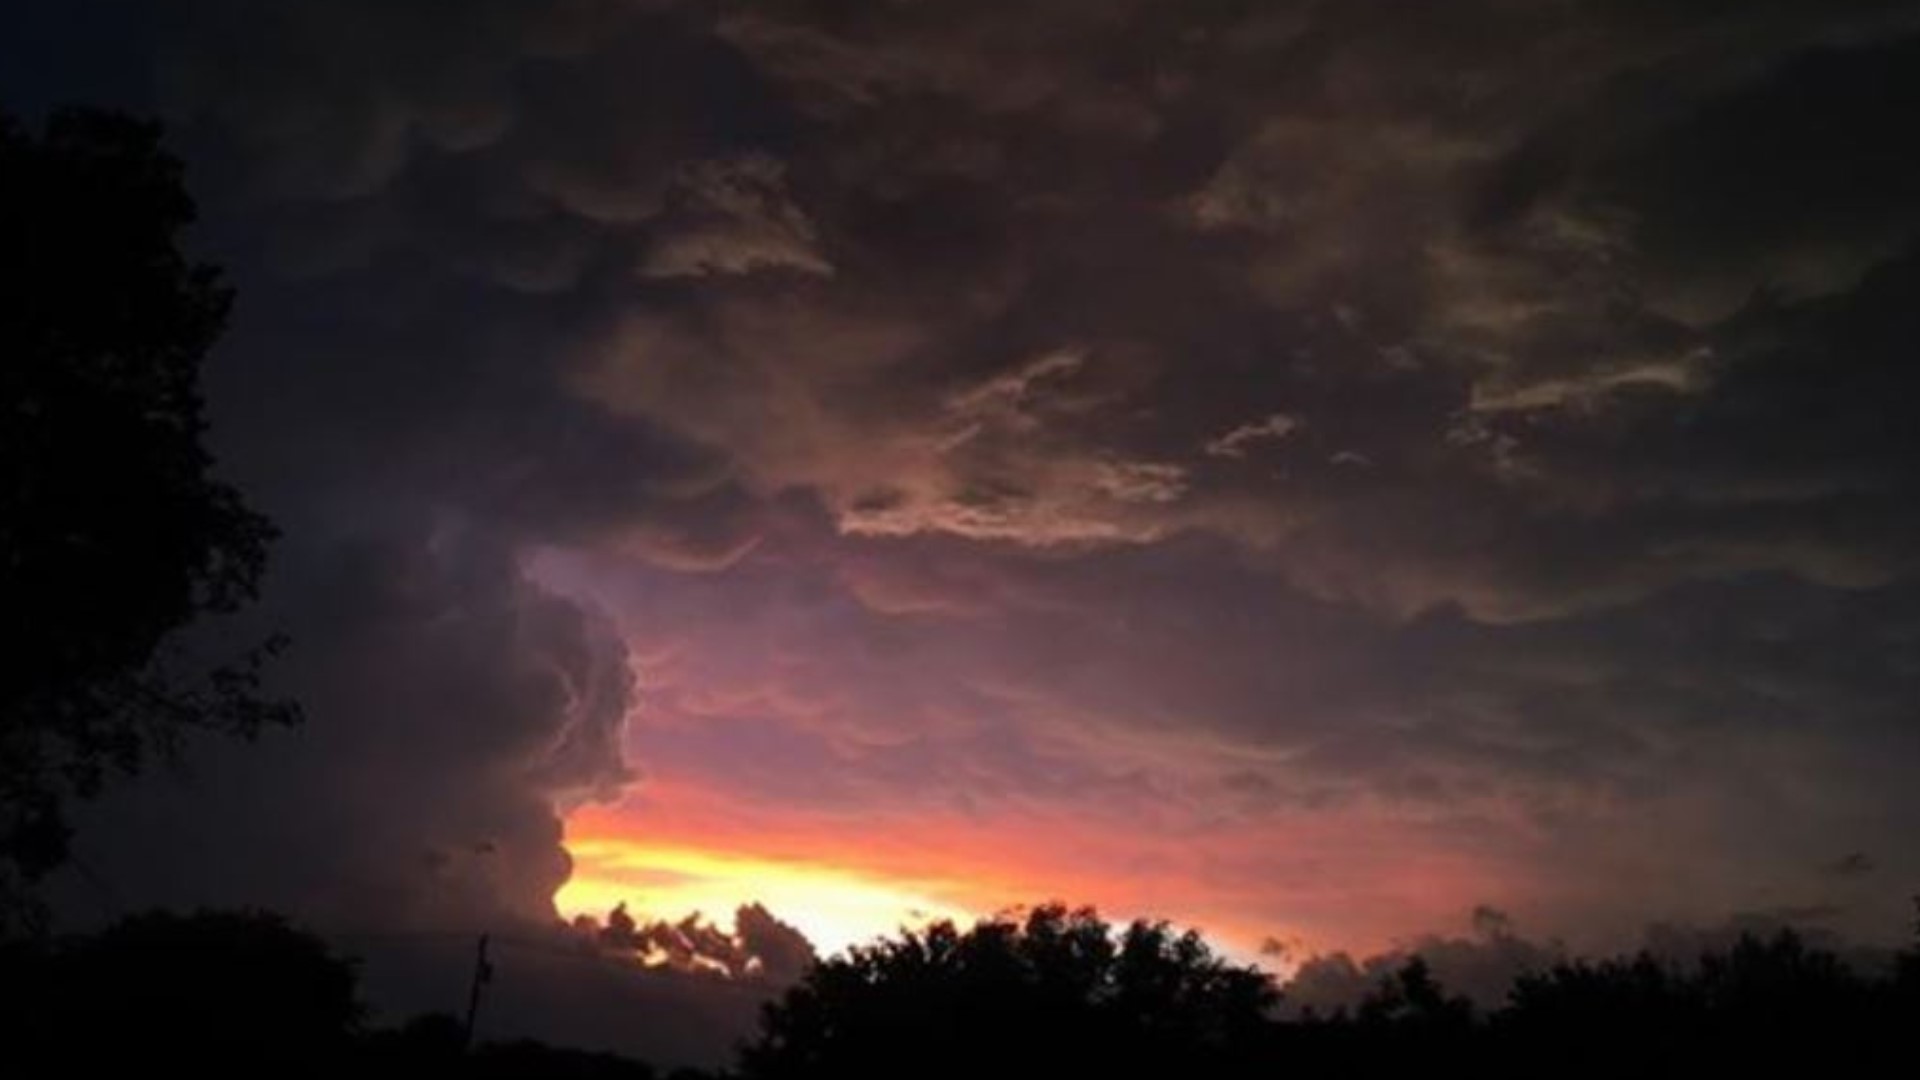 Many KCEN Channel 6 viewers sent in photos and videos of the lightning that lit up the nighttime sky overnight Sunday. Heavy rain and severe storms hit several parts of Bell and McLennan counties.